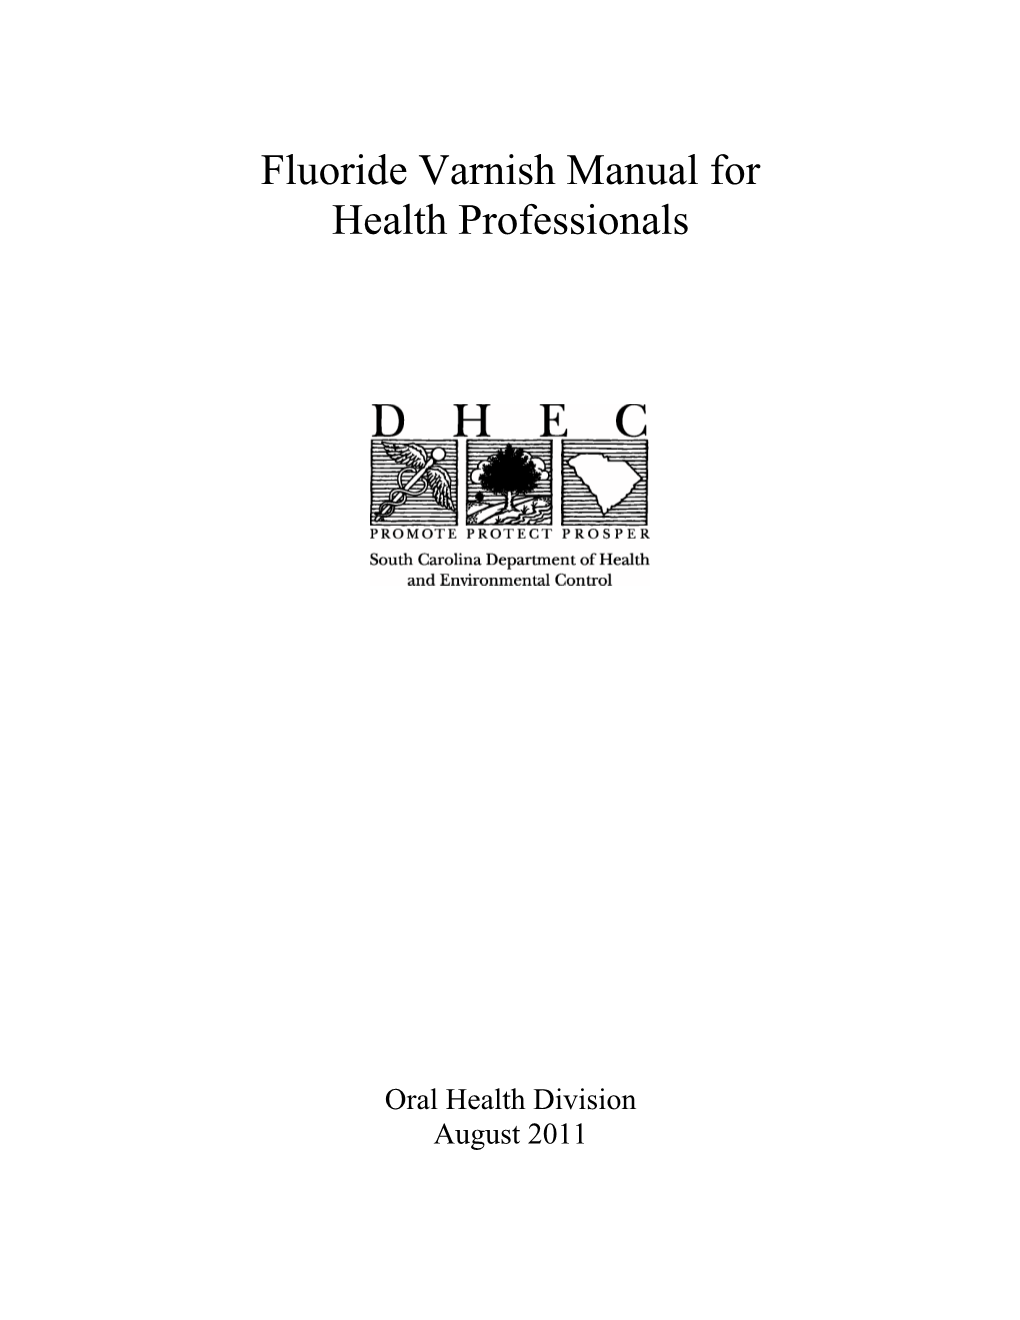 Fluoride Varnish Manual for Health Professionals